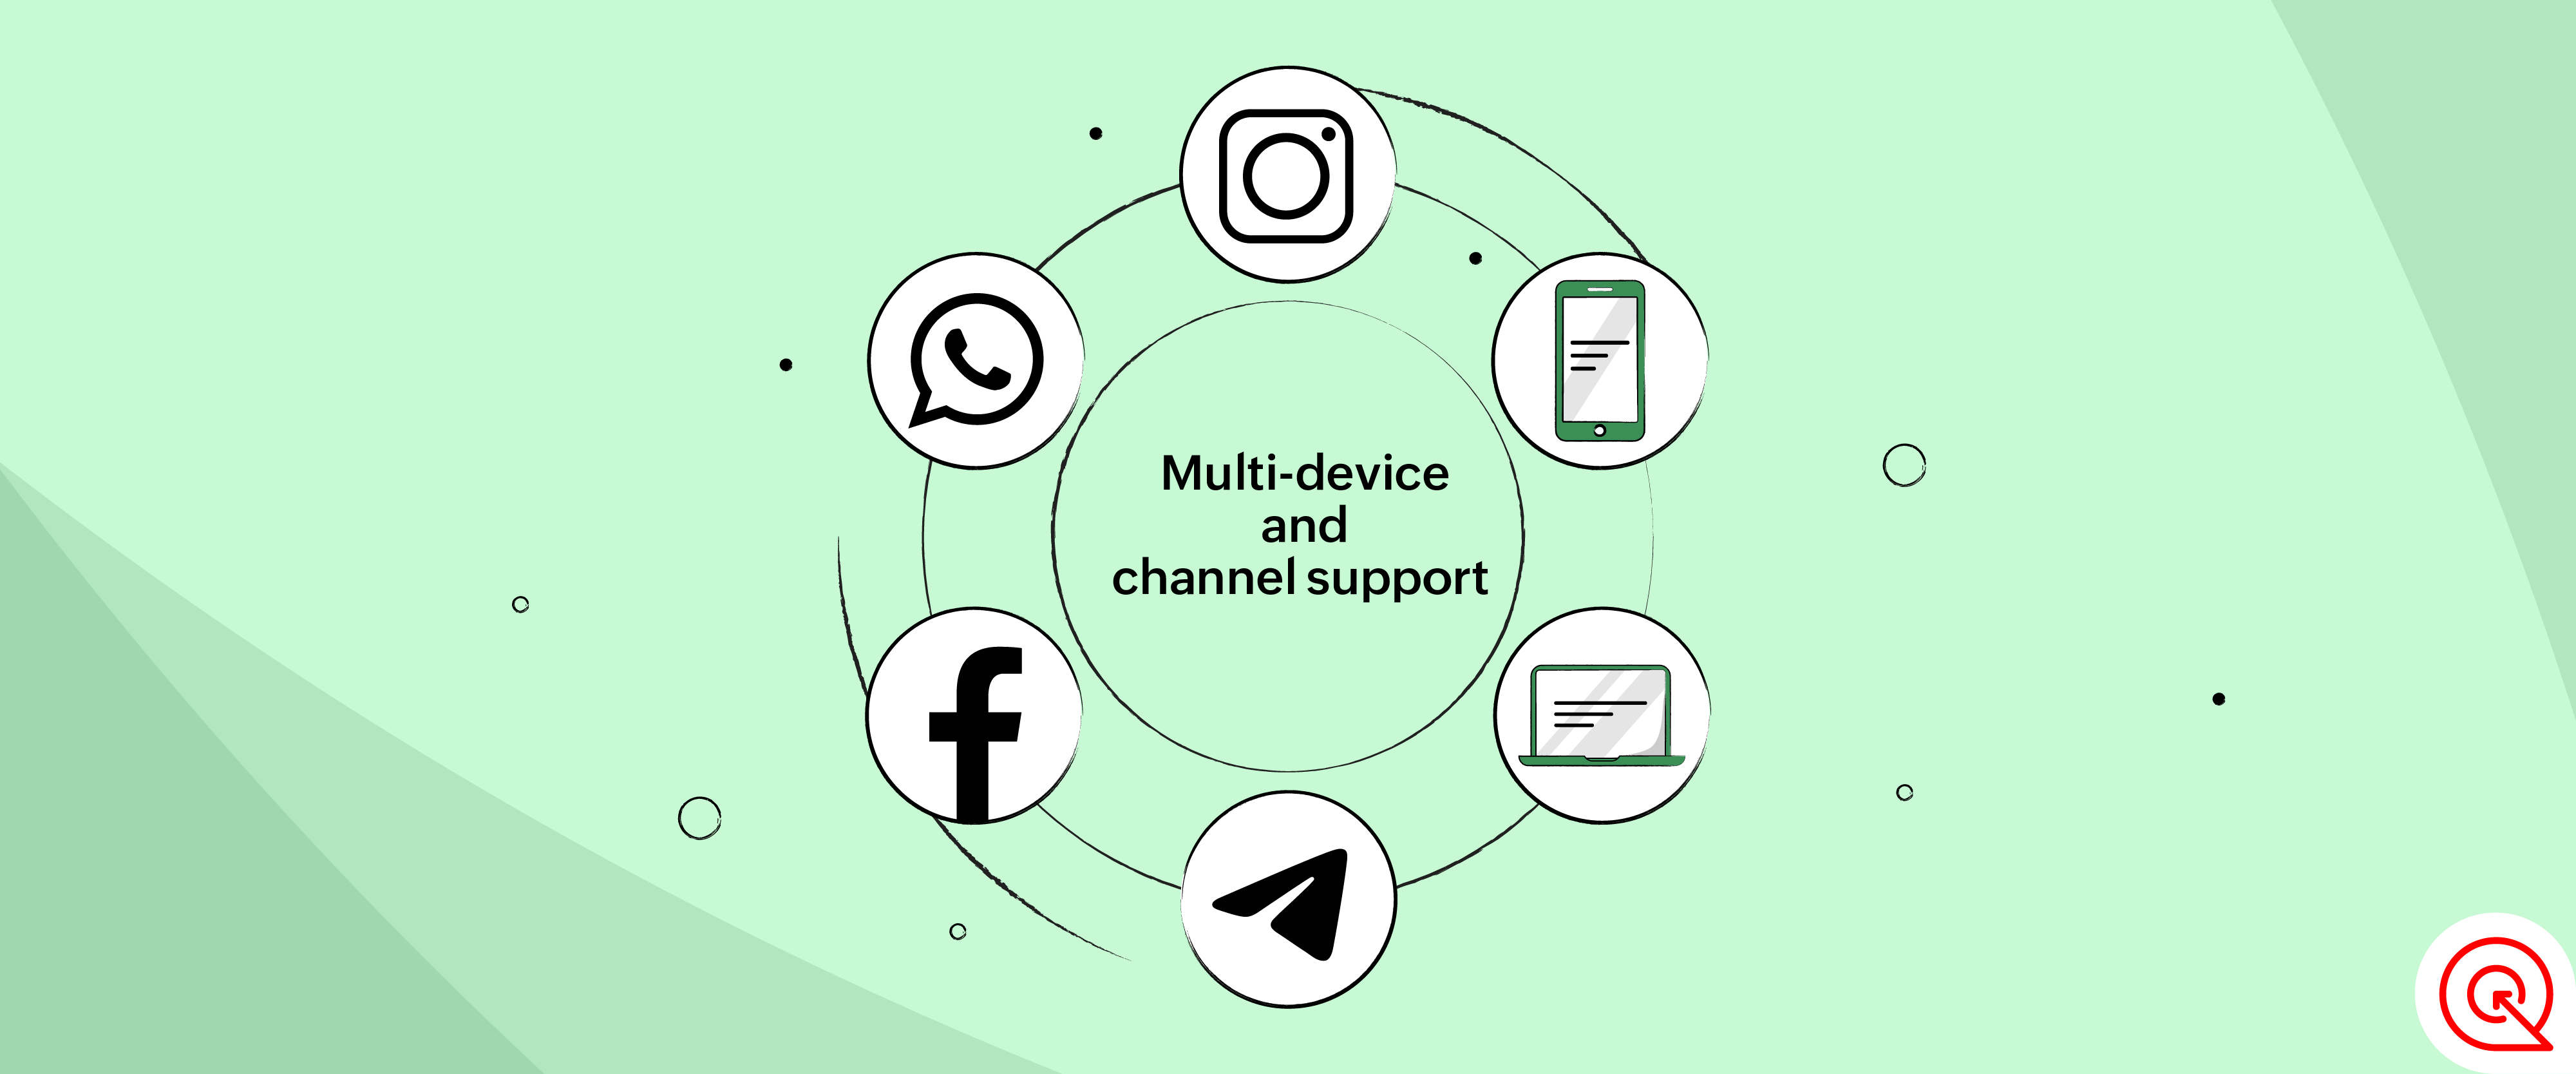 Multi-device and channel support for improving customer experience